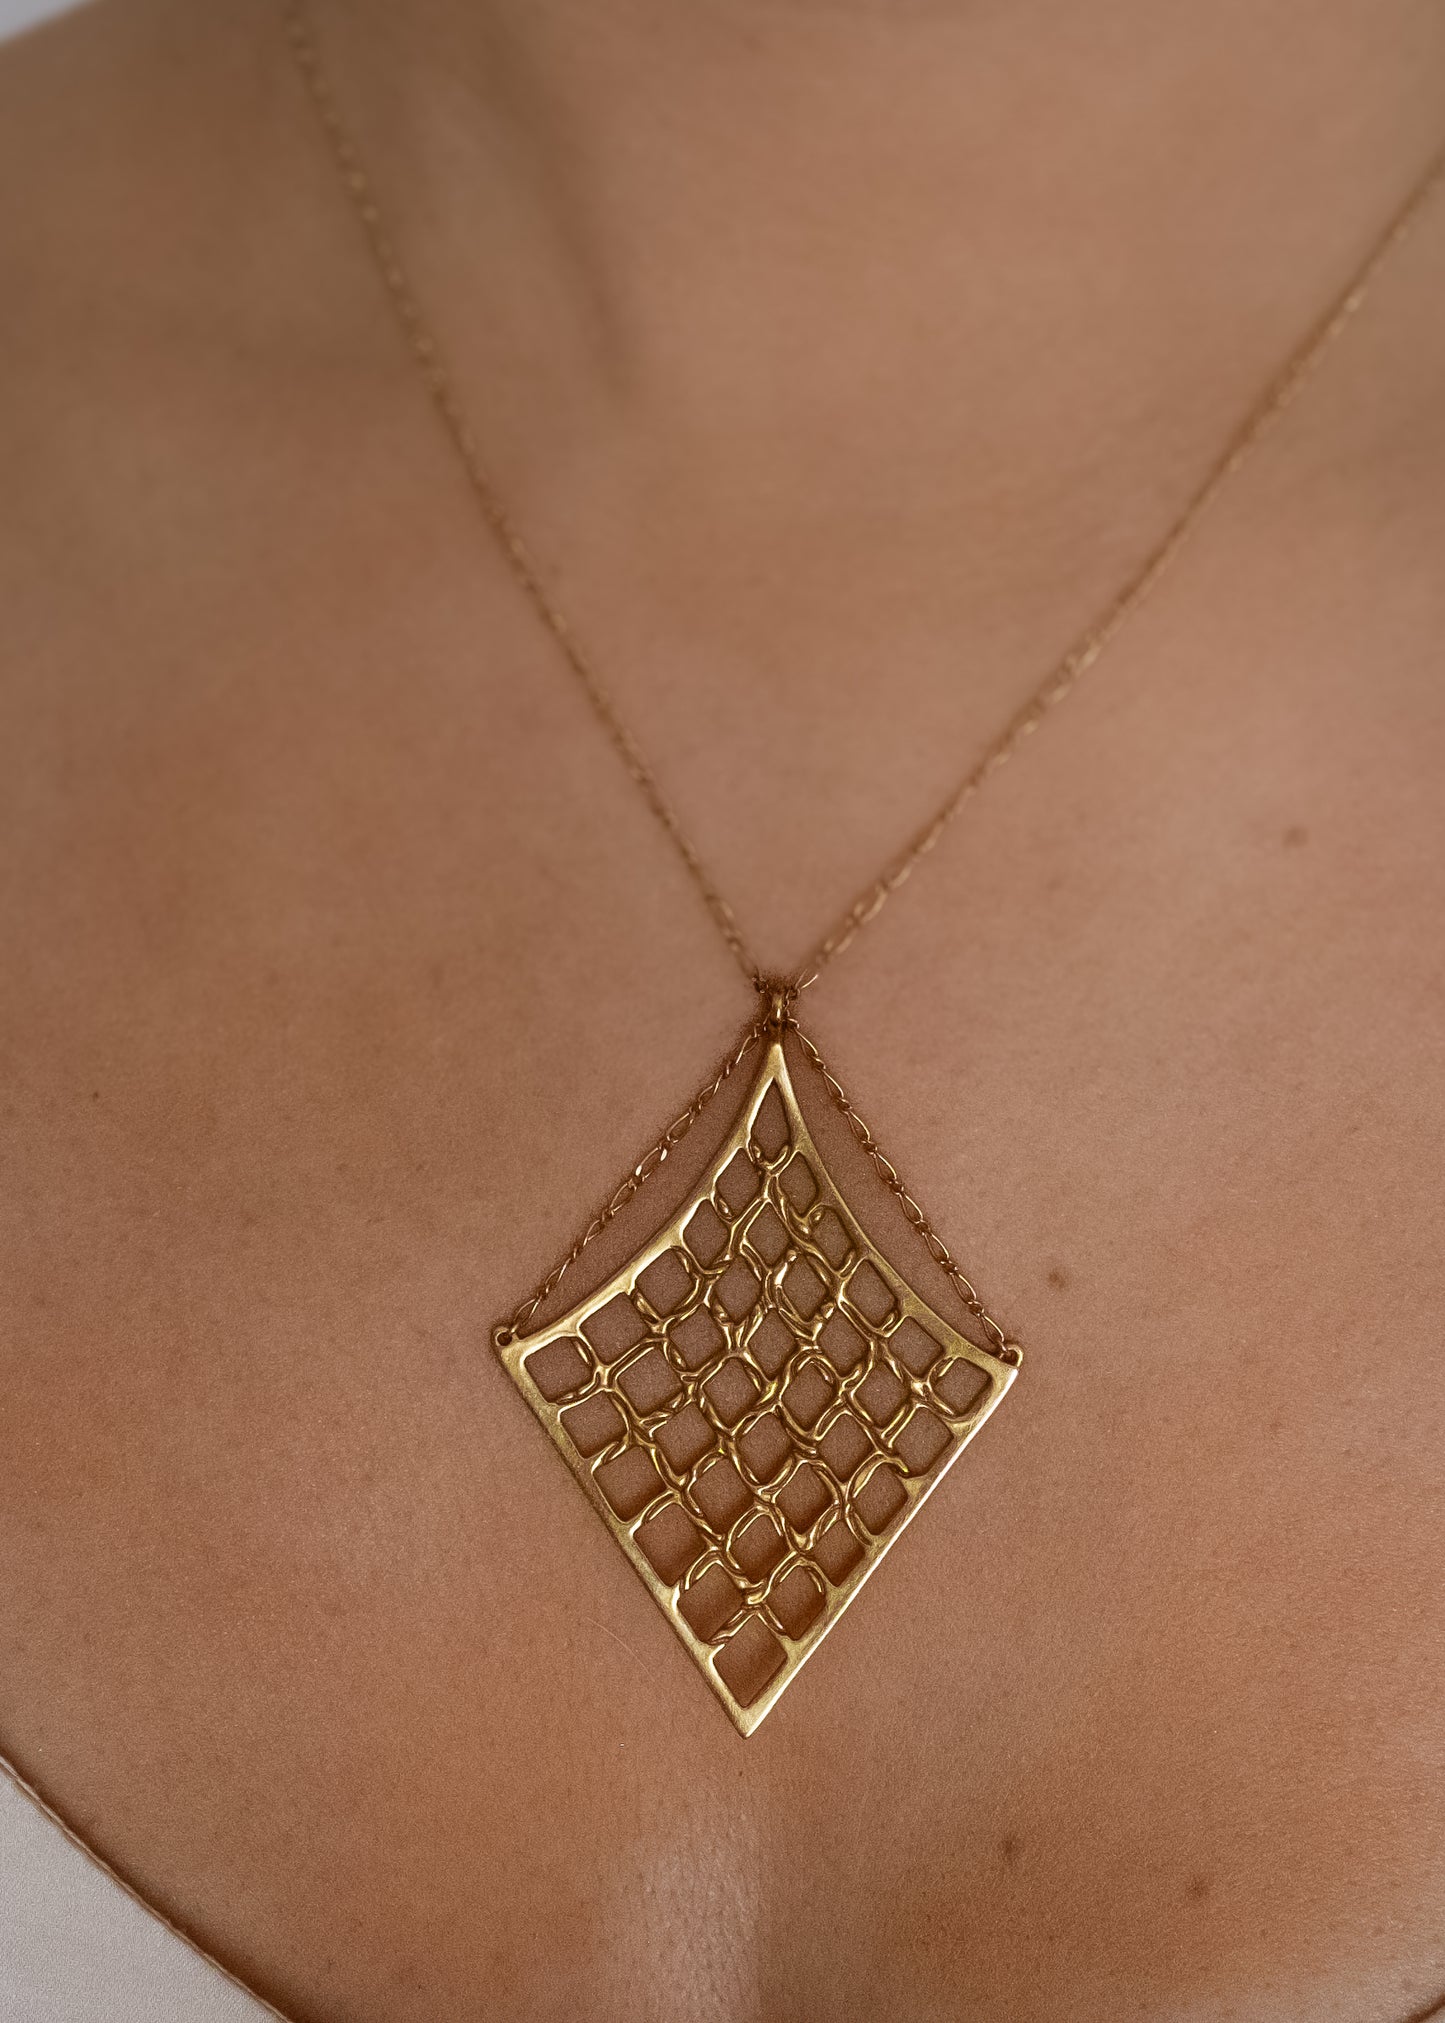 As formidable as the princess for which it is named. With its prominent presence and detailed gold lattice work, the Shera necklace is a balance of delicate, bold and eye-catching—an empowering piece that makes a statement.